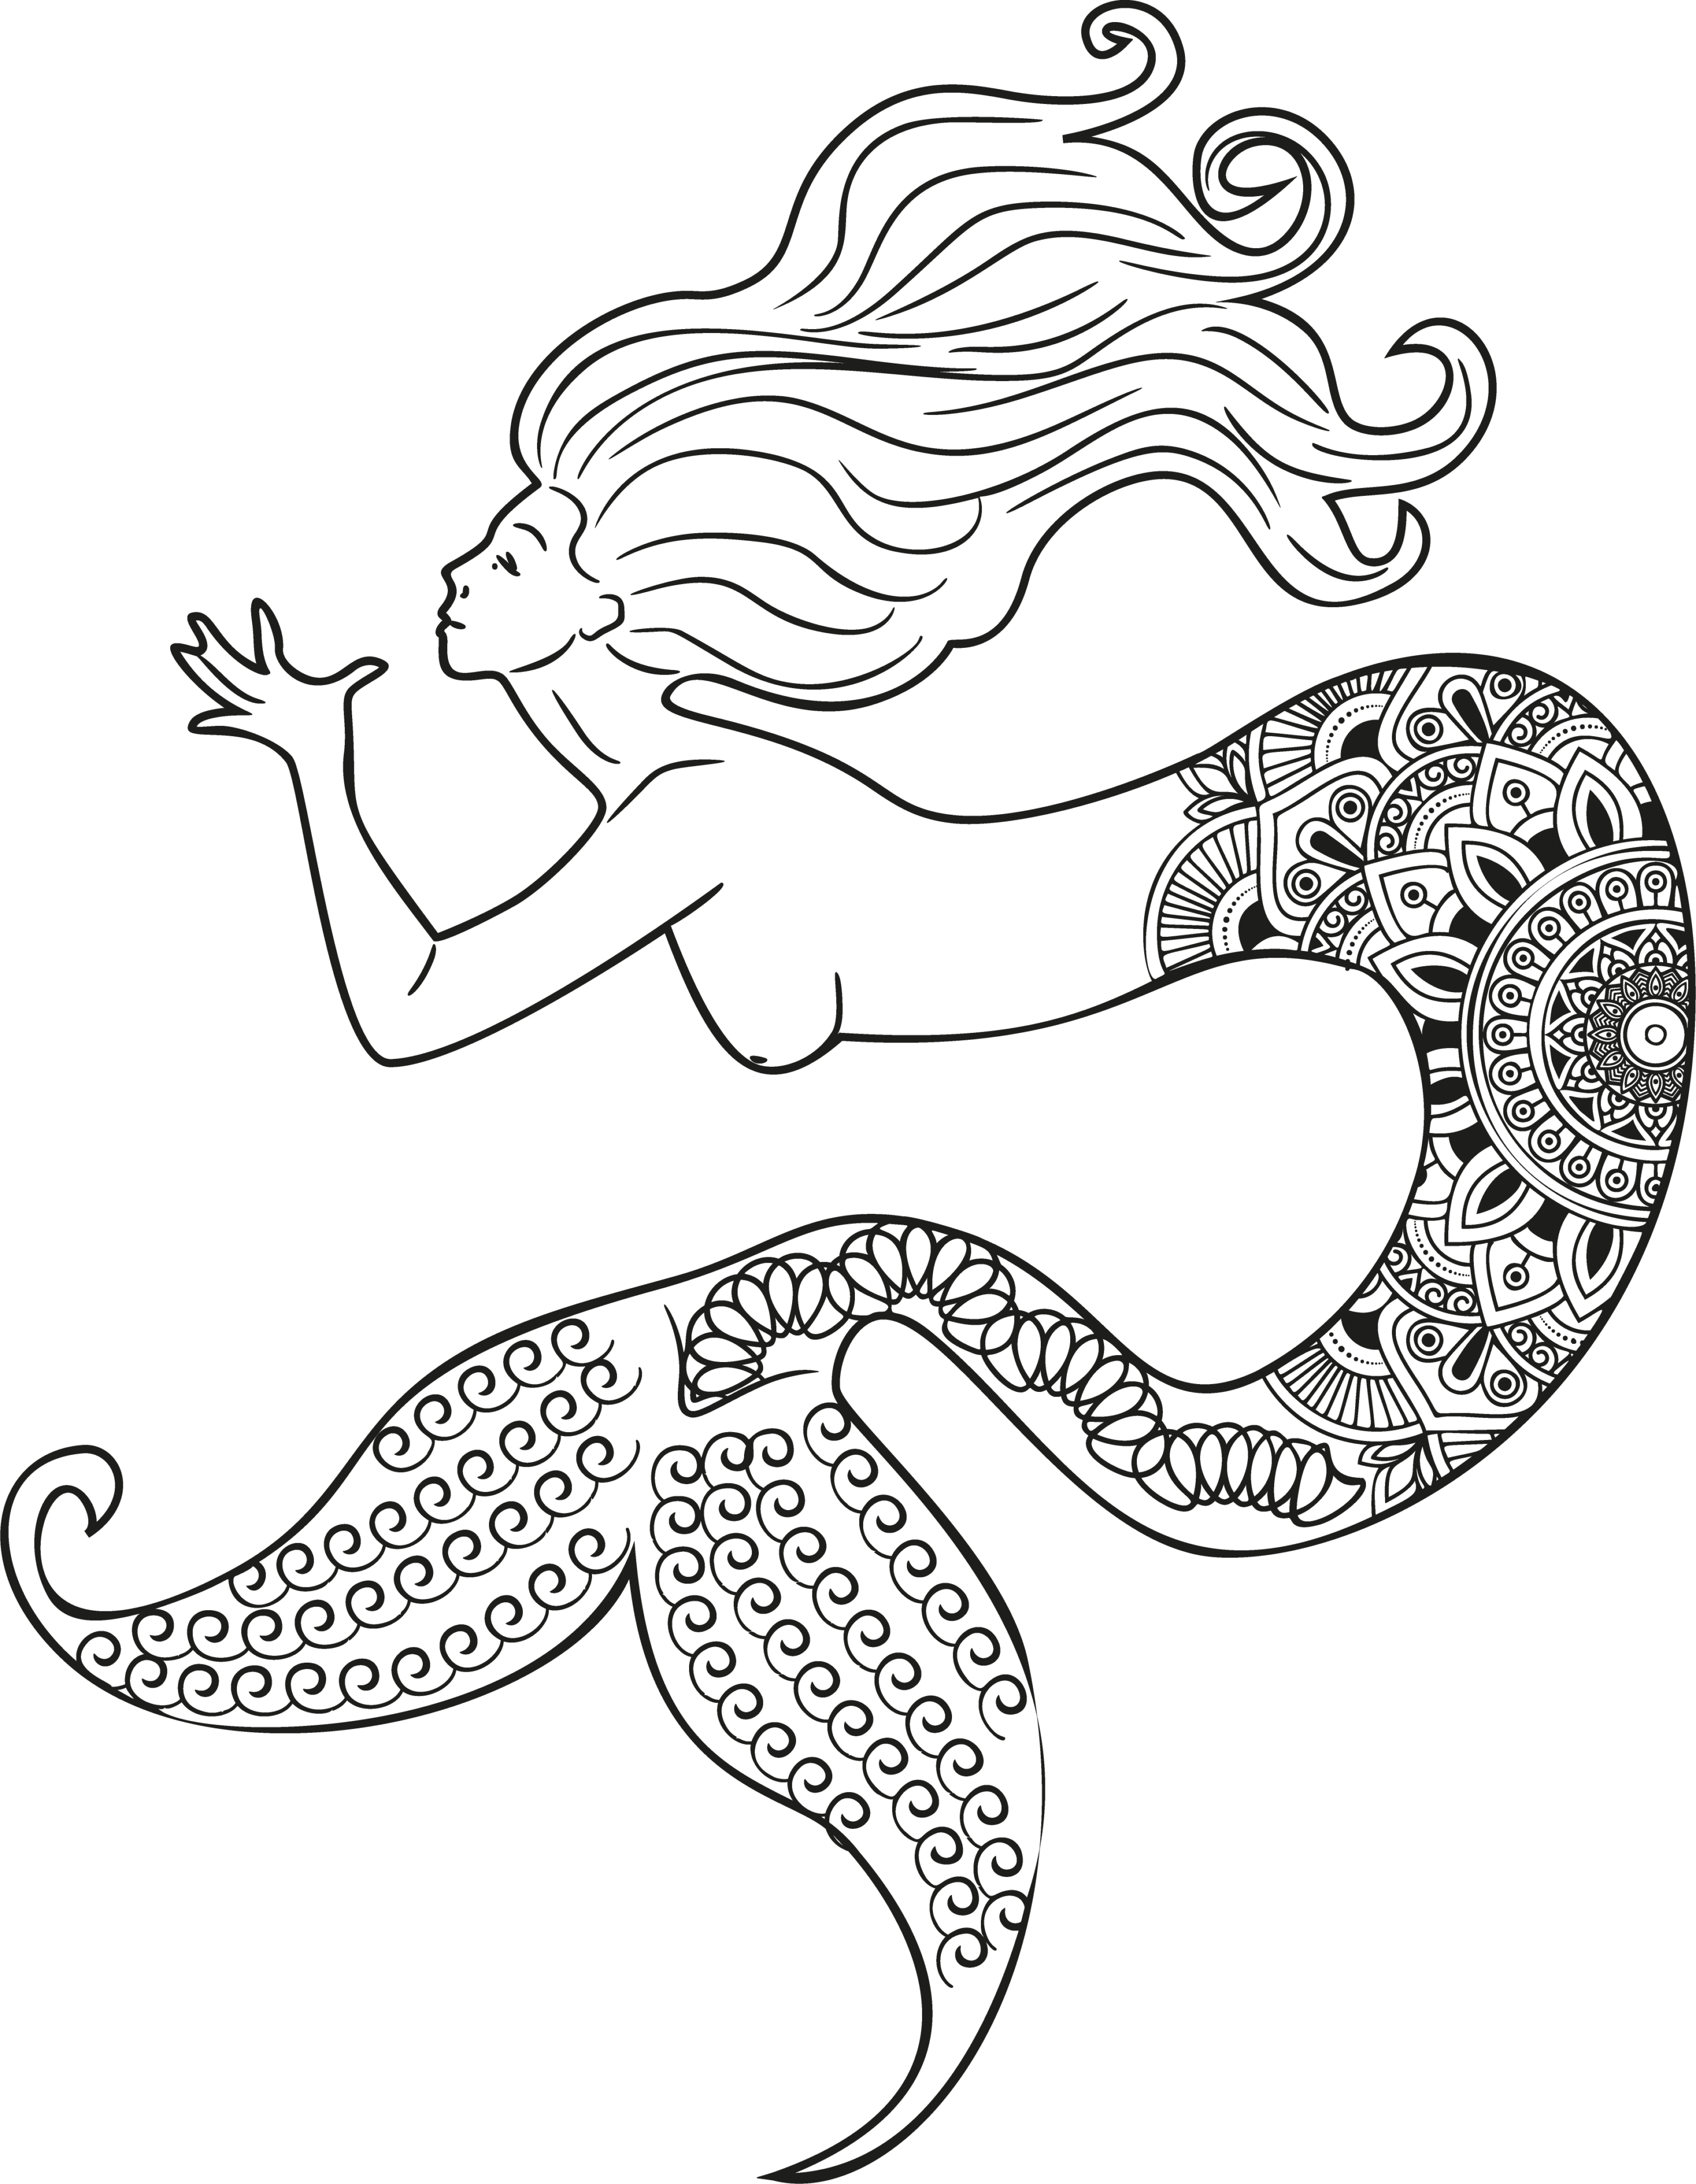 Hair is developed in different directions of a mermaid.